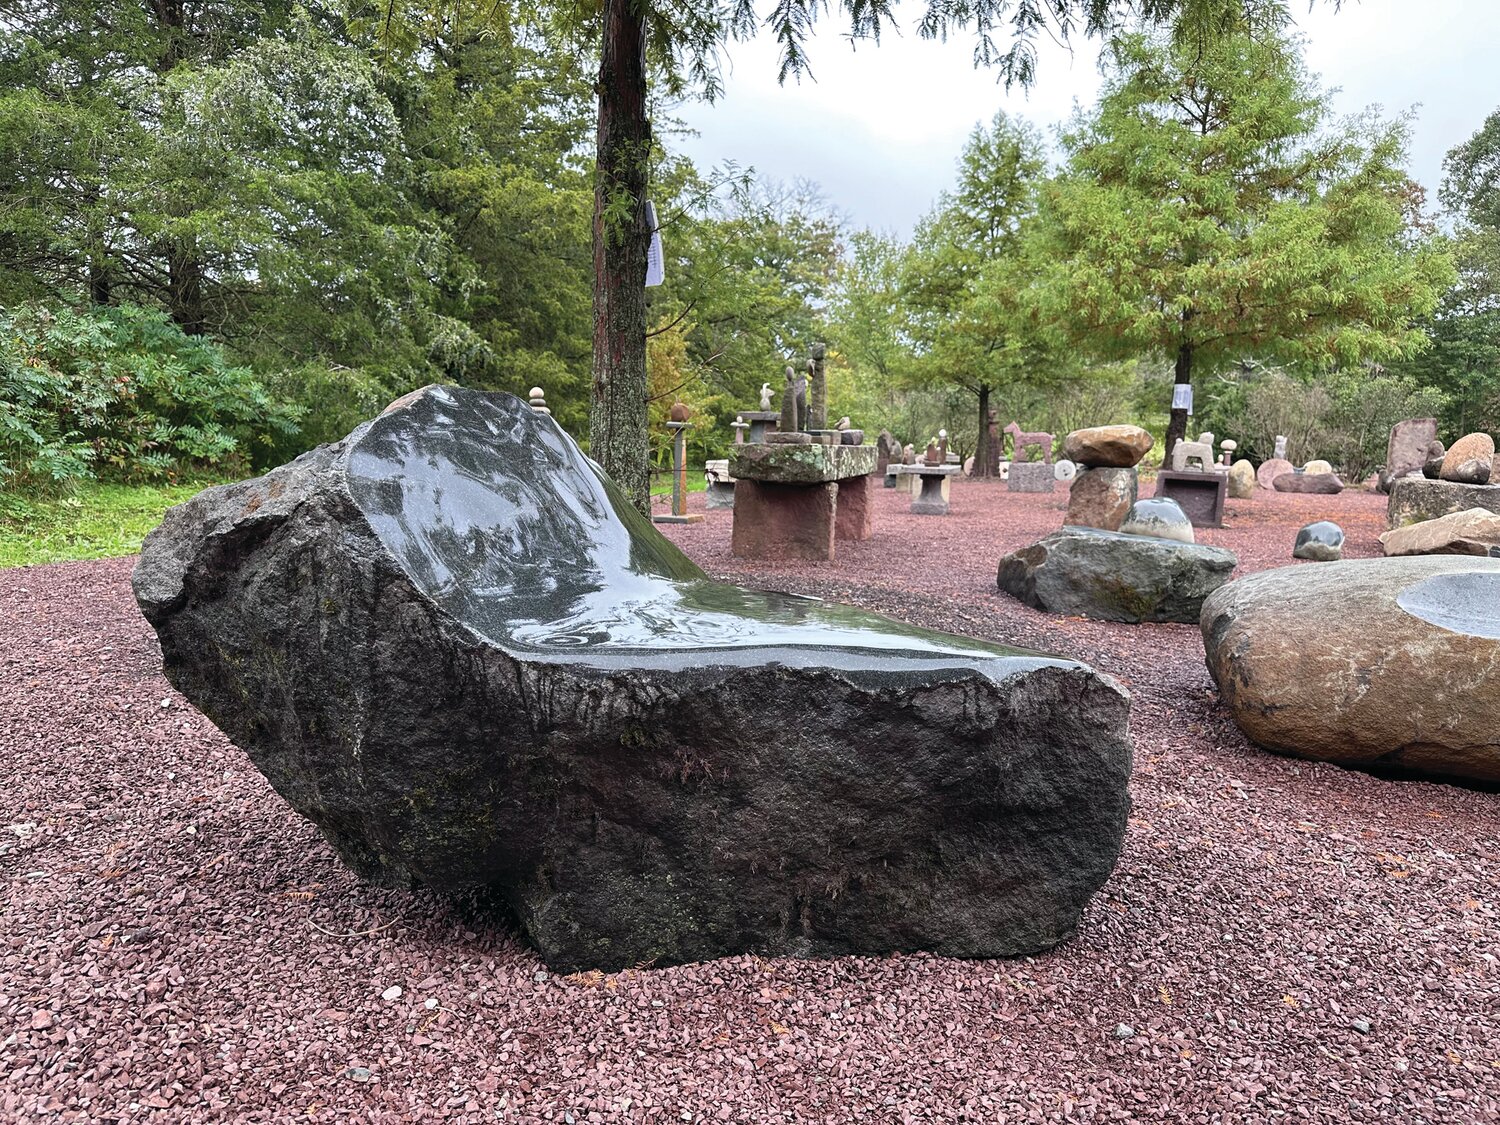 Justin Anchinsko “listens” to the stone before creating one-of-a-kind stone benches and stone sculpture.